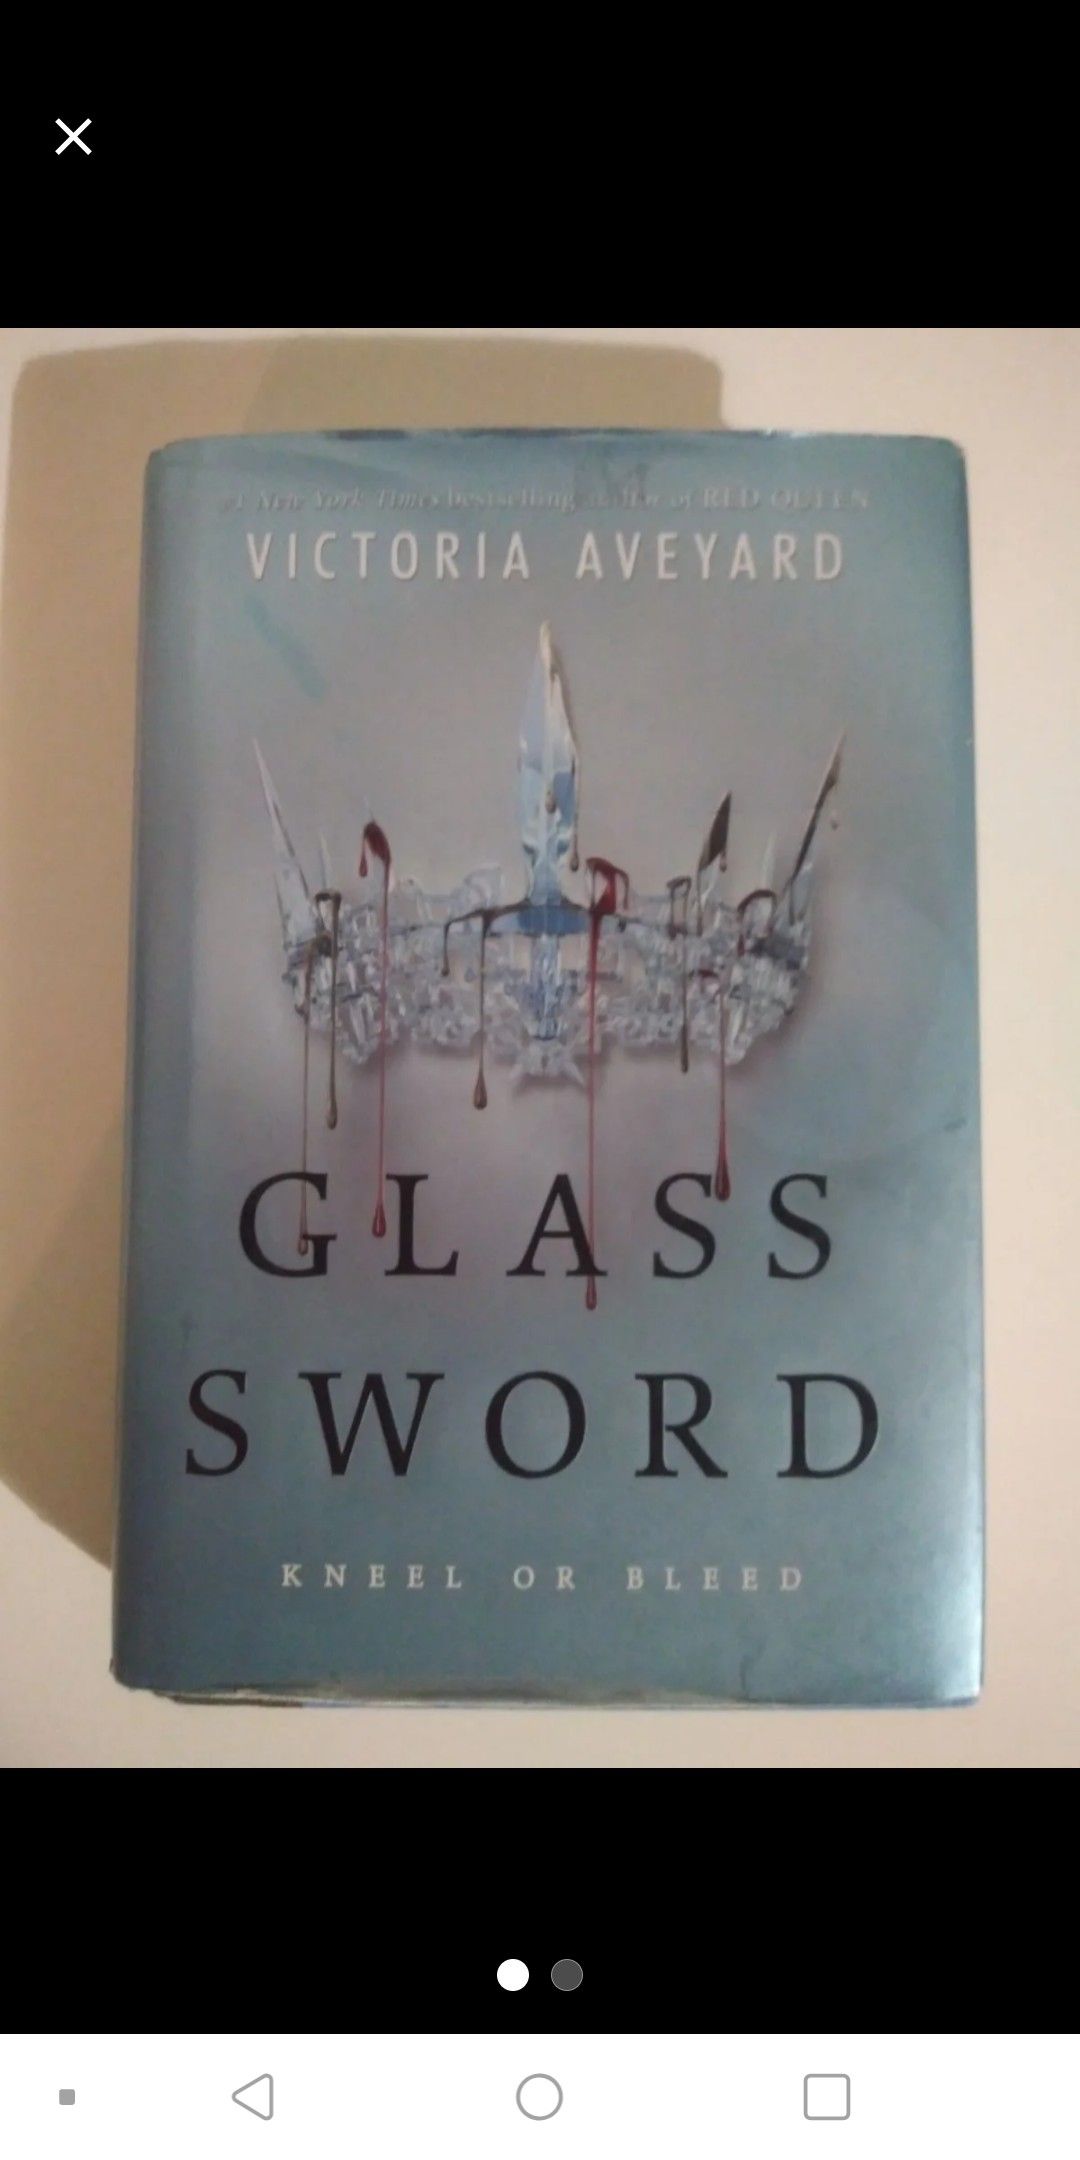 Glass sword by victoria aveyard